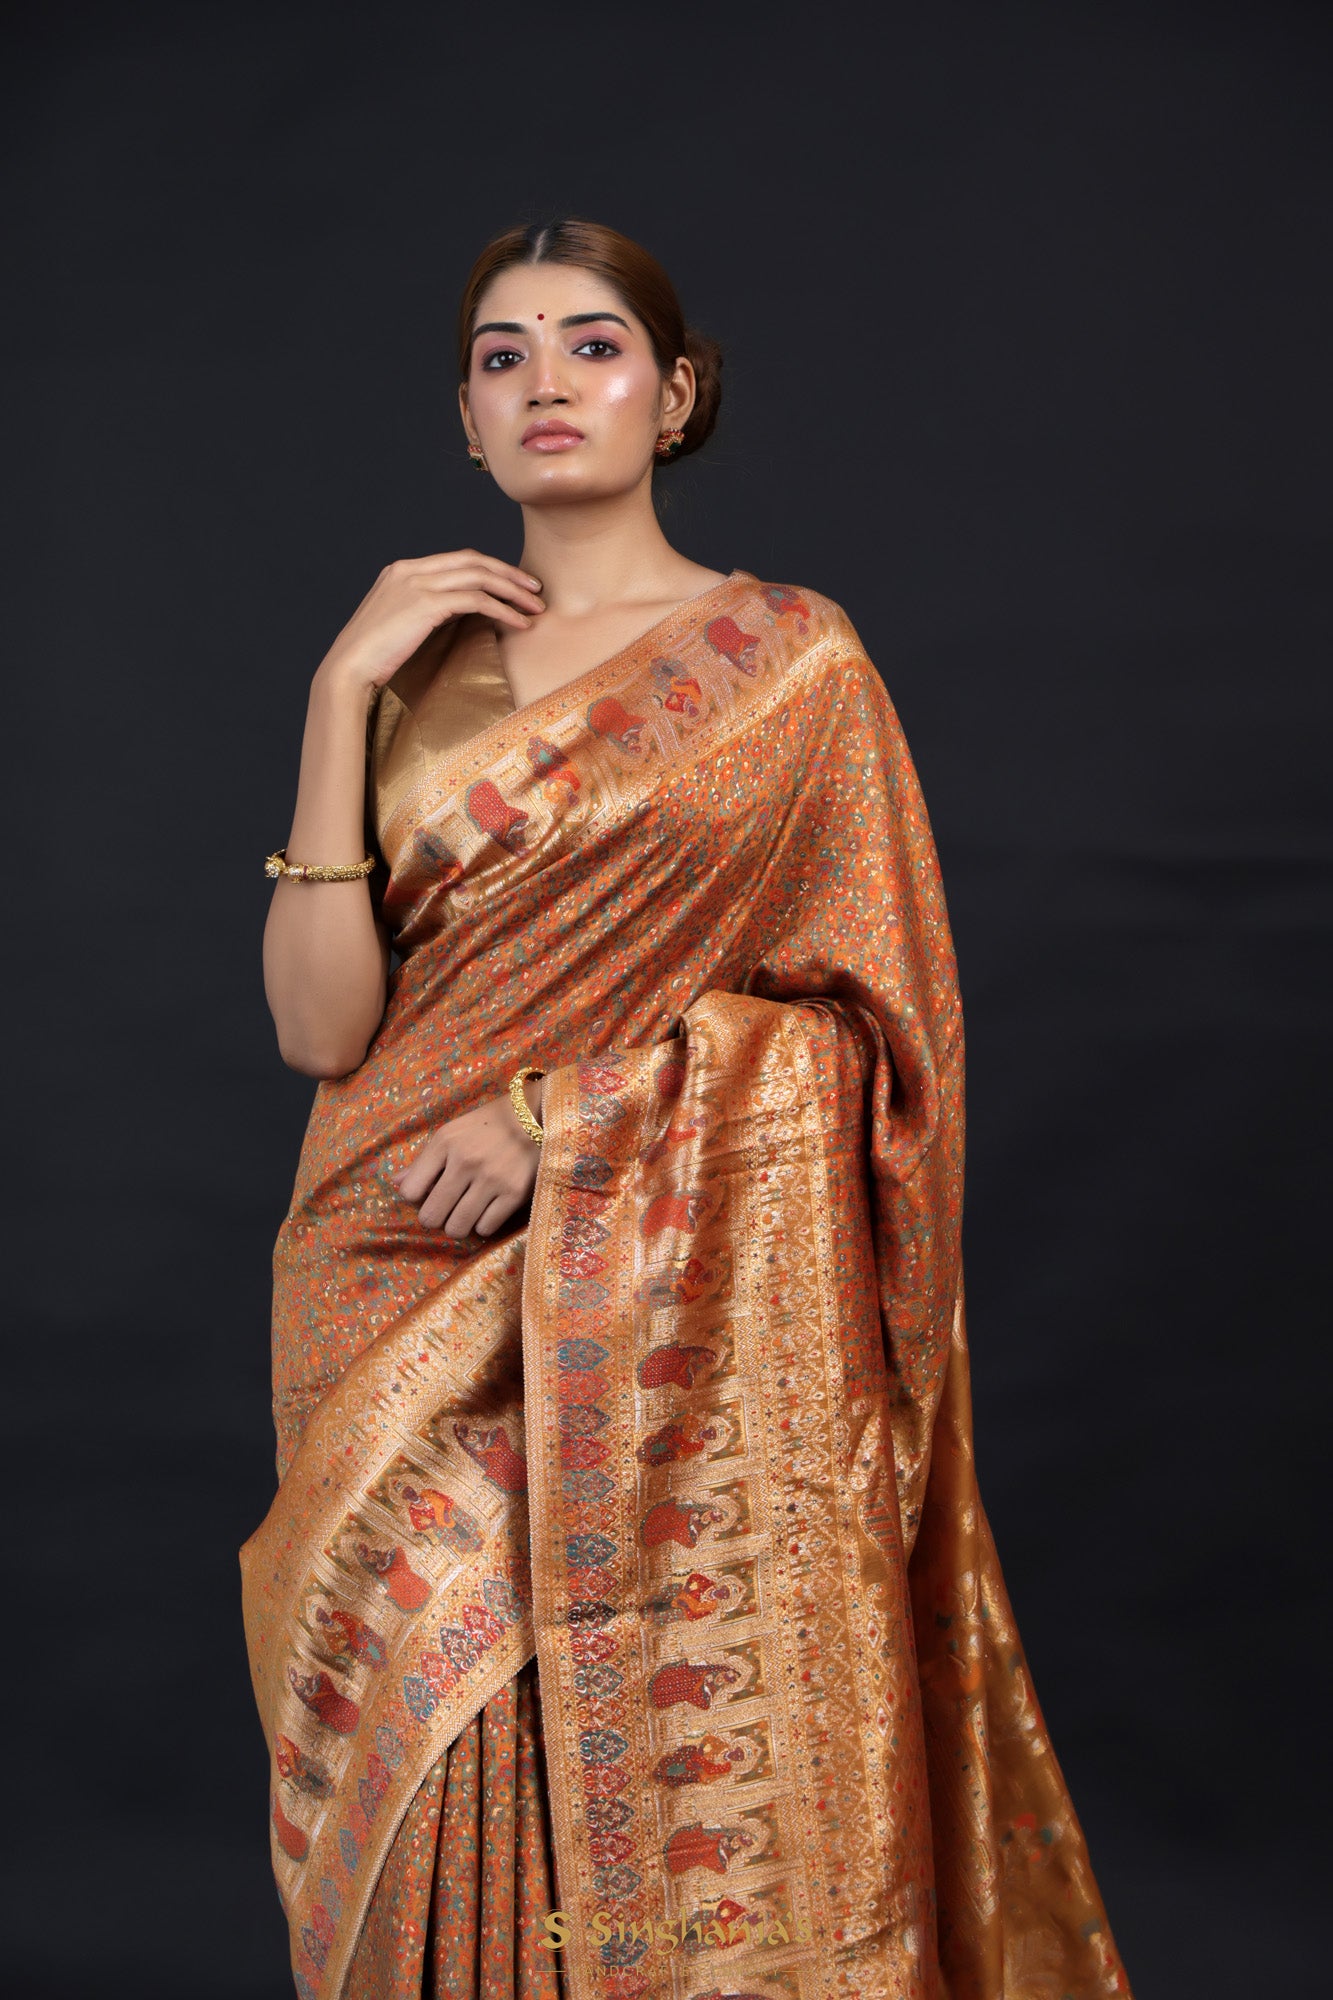 Sandstone Brown Kani Silk Handwoven Saree With Floral Jaal Weaving